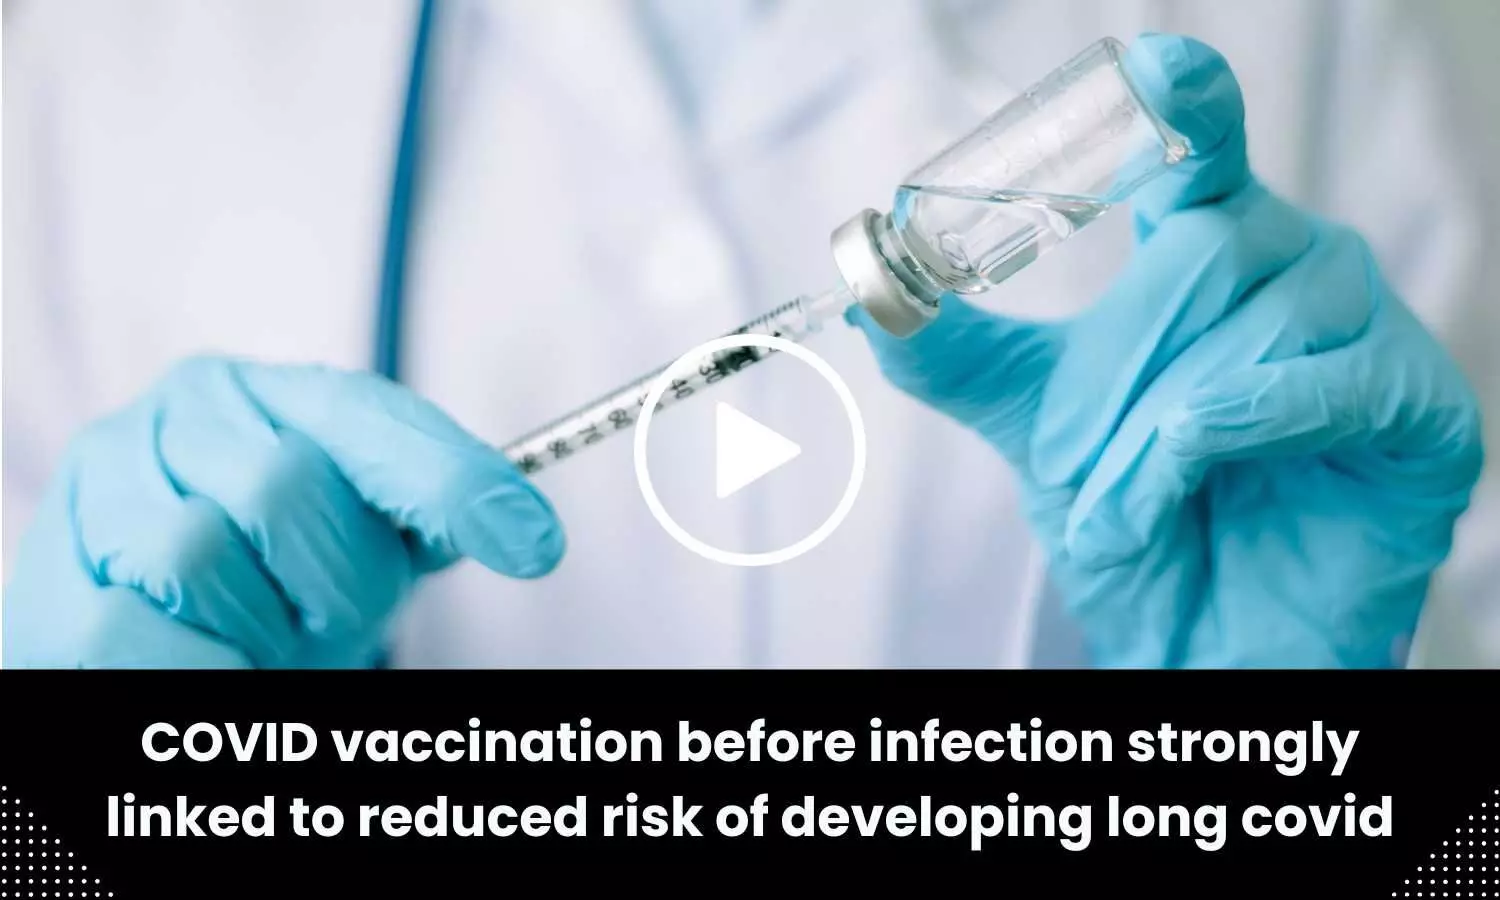 COVID vaccination before infection strongly linked to reduced risk of developing long covid